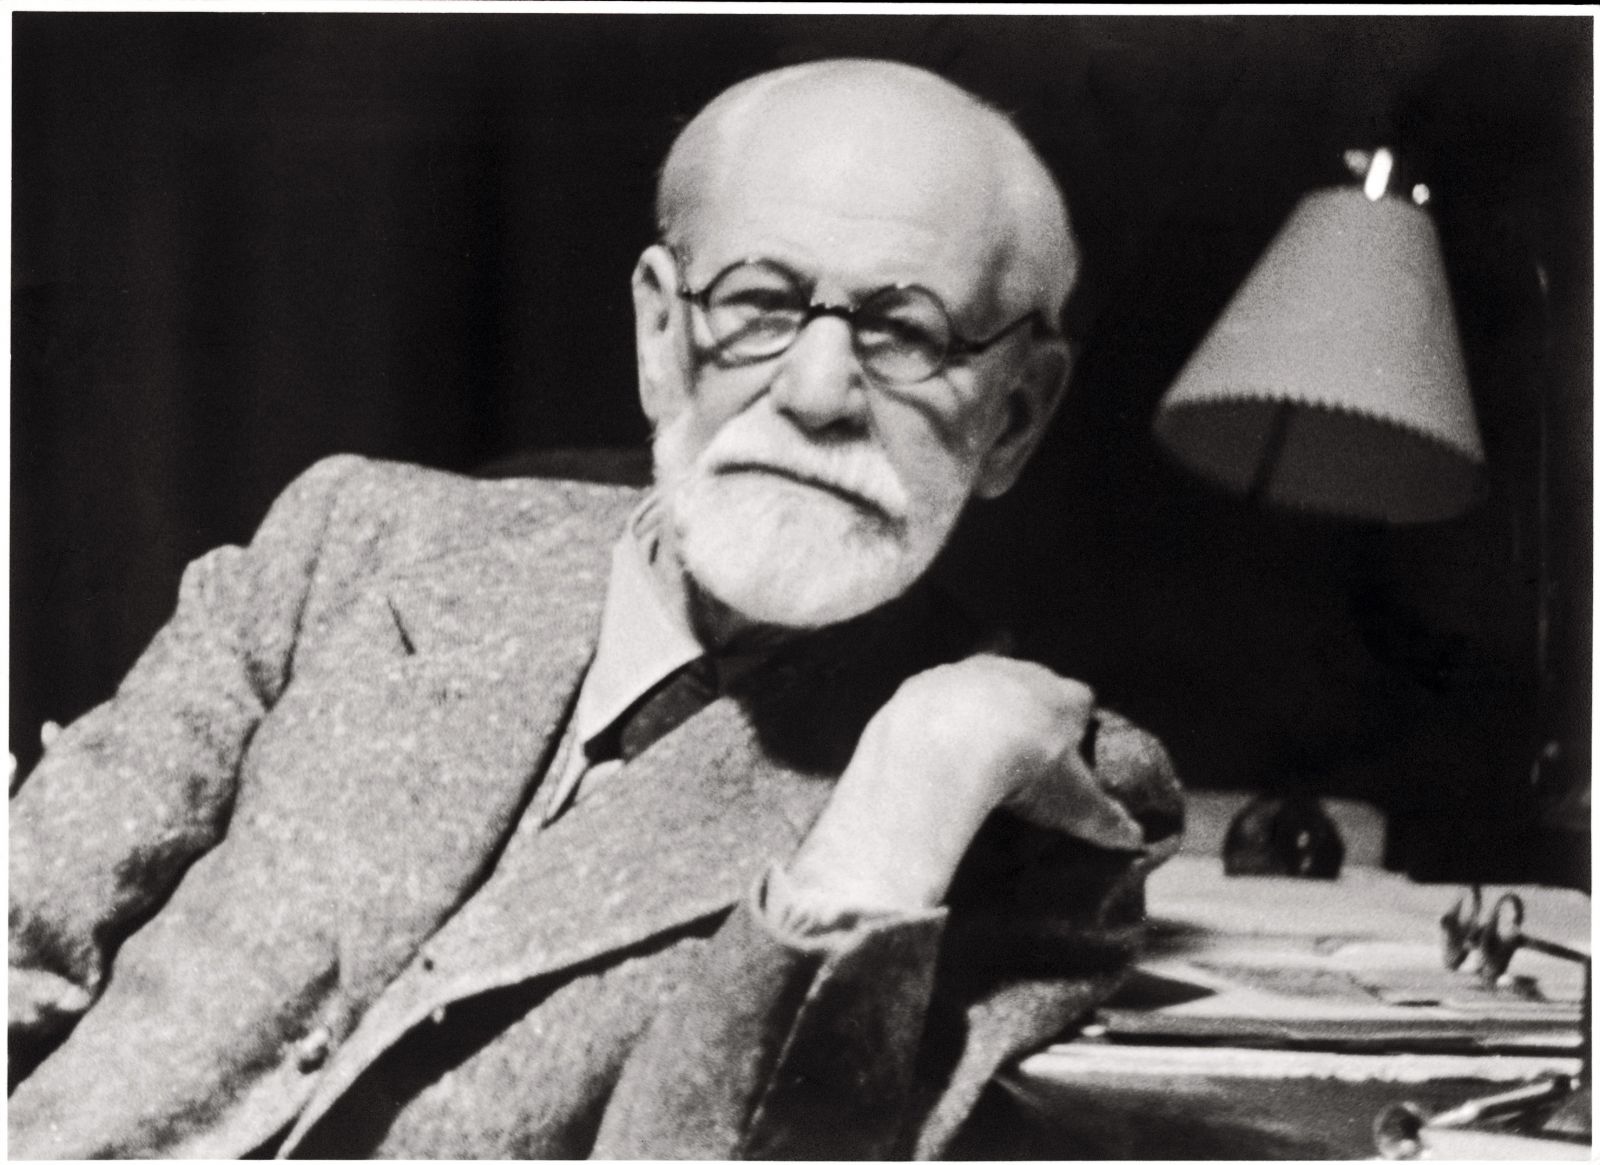 An old black and white photo of Sigmund Freud